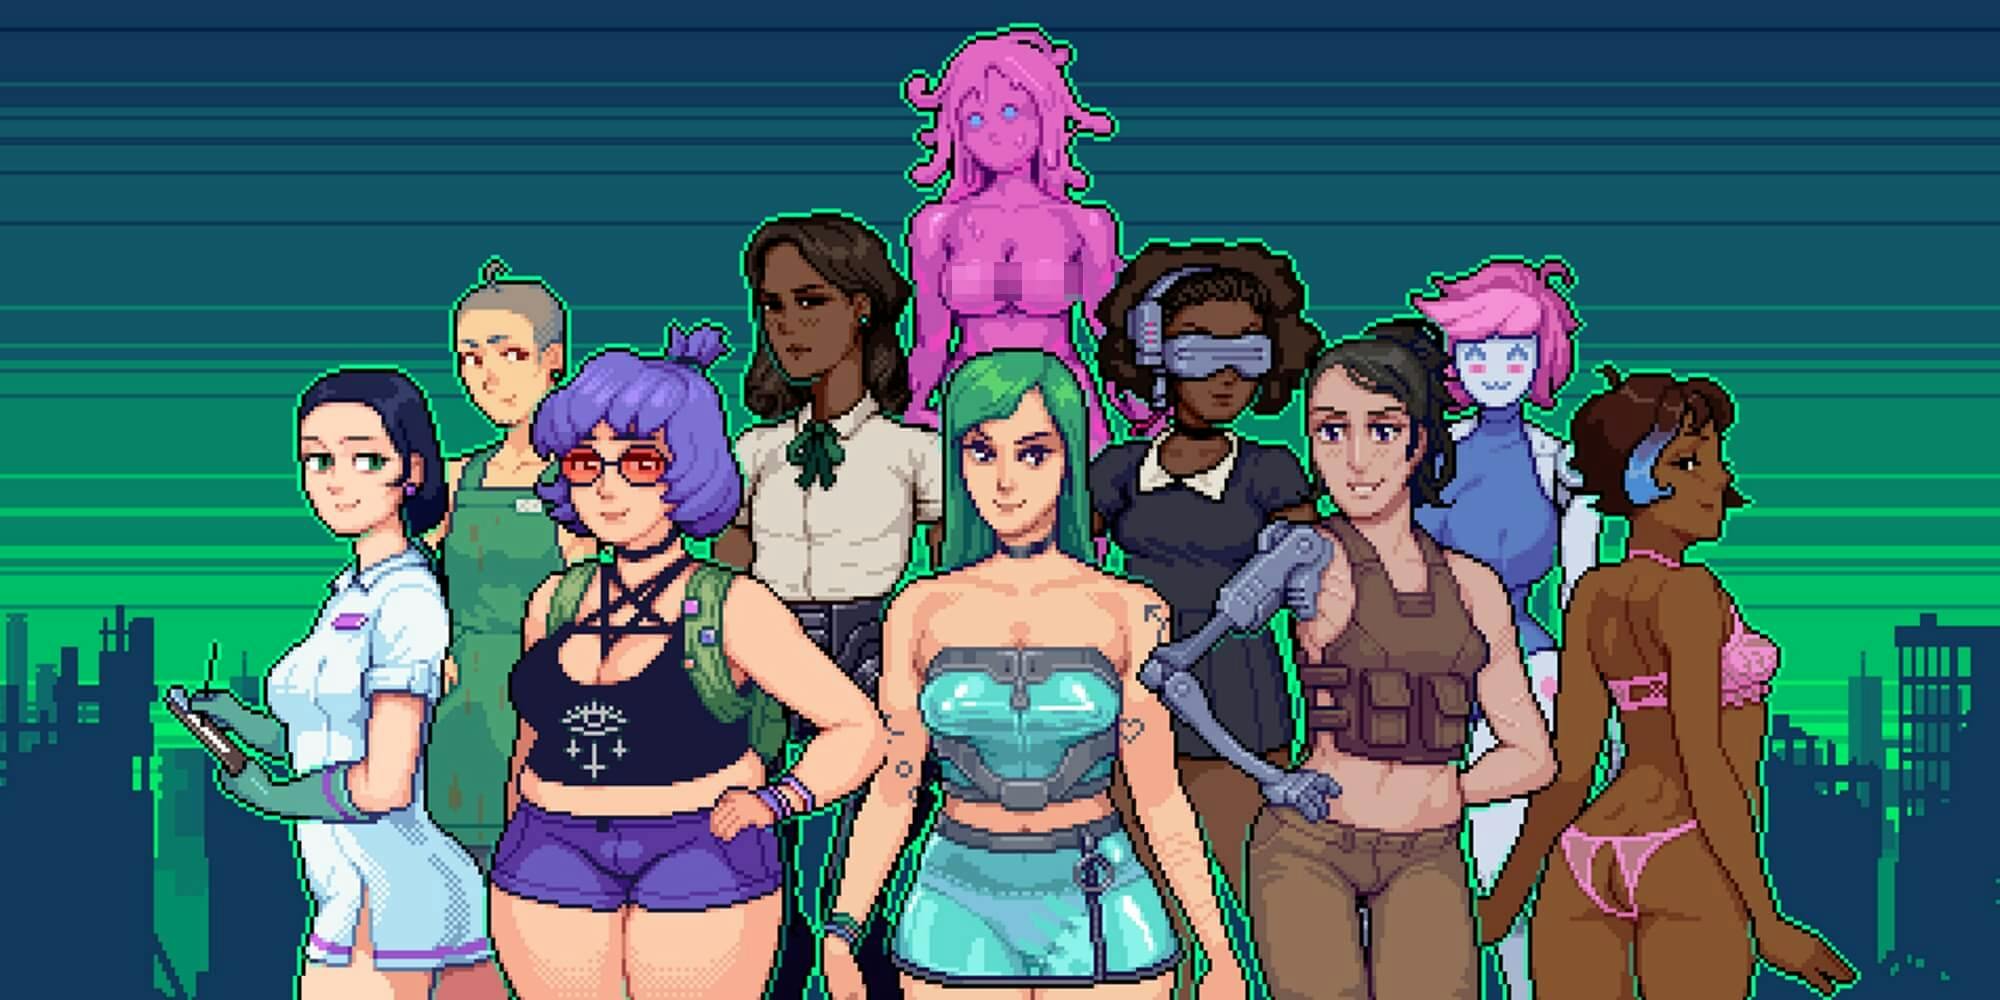 Trans porn game Hardcoded is embracing lesbian tentacle sex